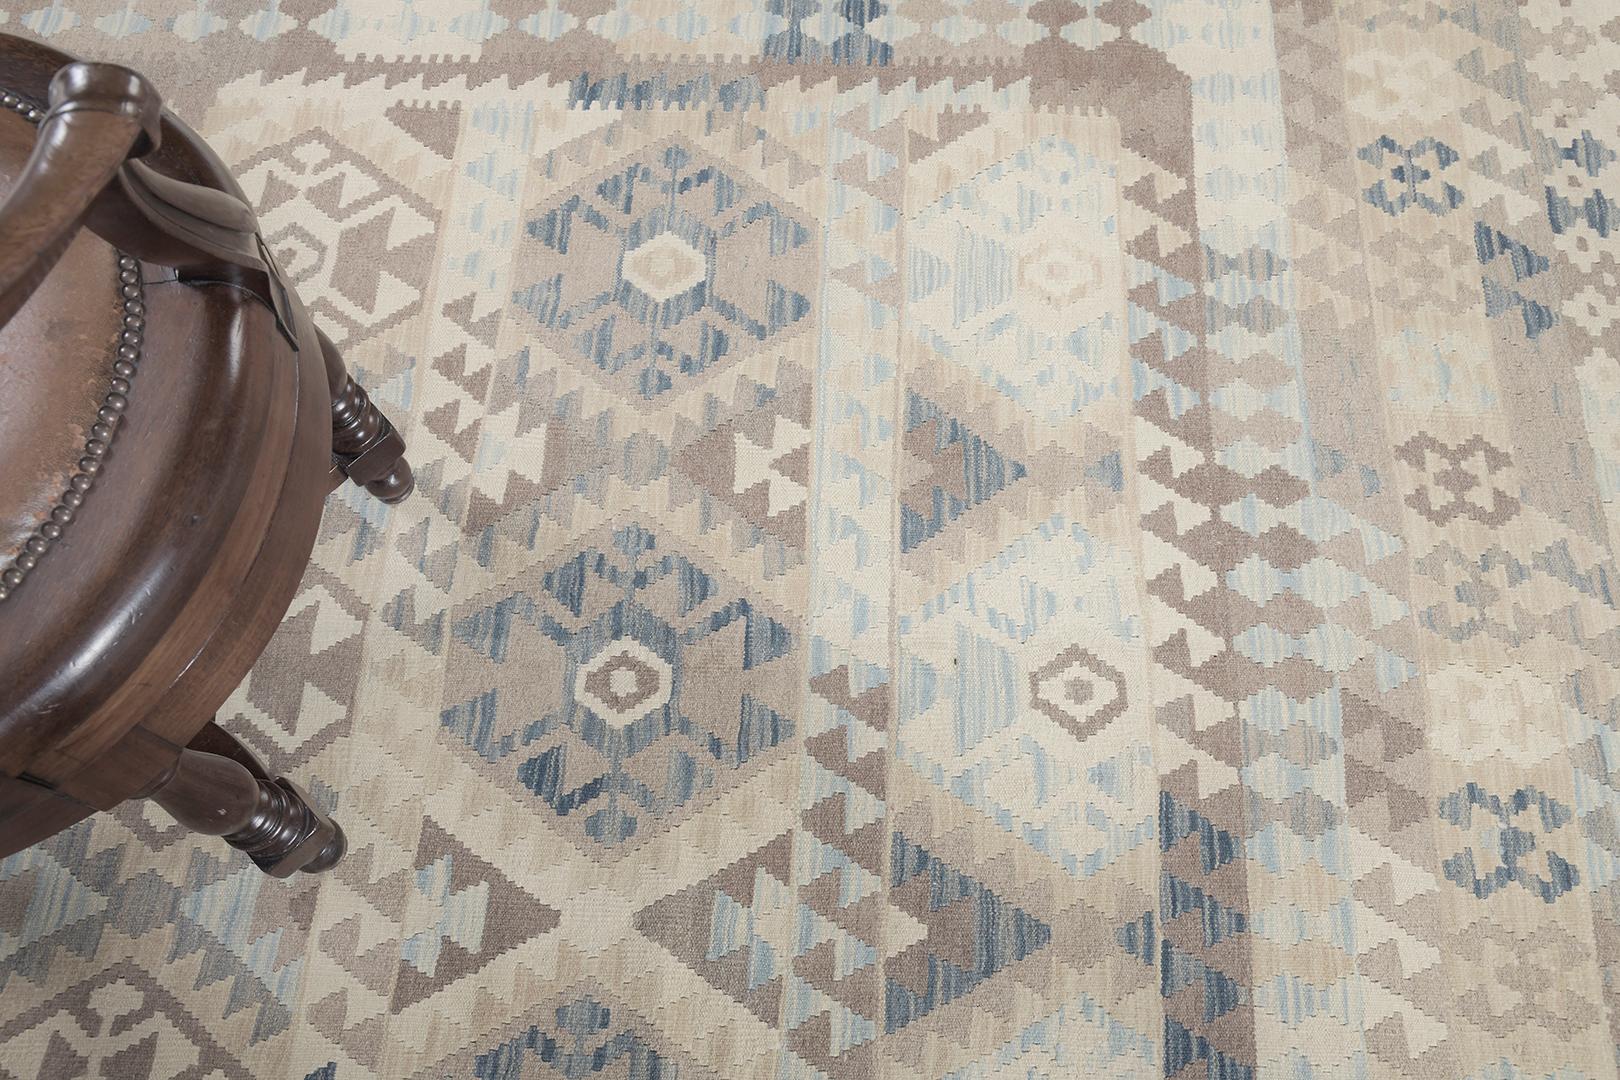 A gorgeous vintage-style Tribal flat weave banded with geometric elements. The muted earth-hued alternating squares create a simple yet interesting design for a wide variety of interiors. Its technique and creativity leave a powerful impact on every